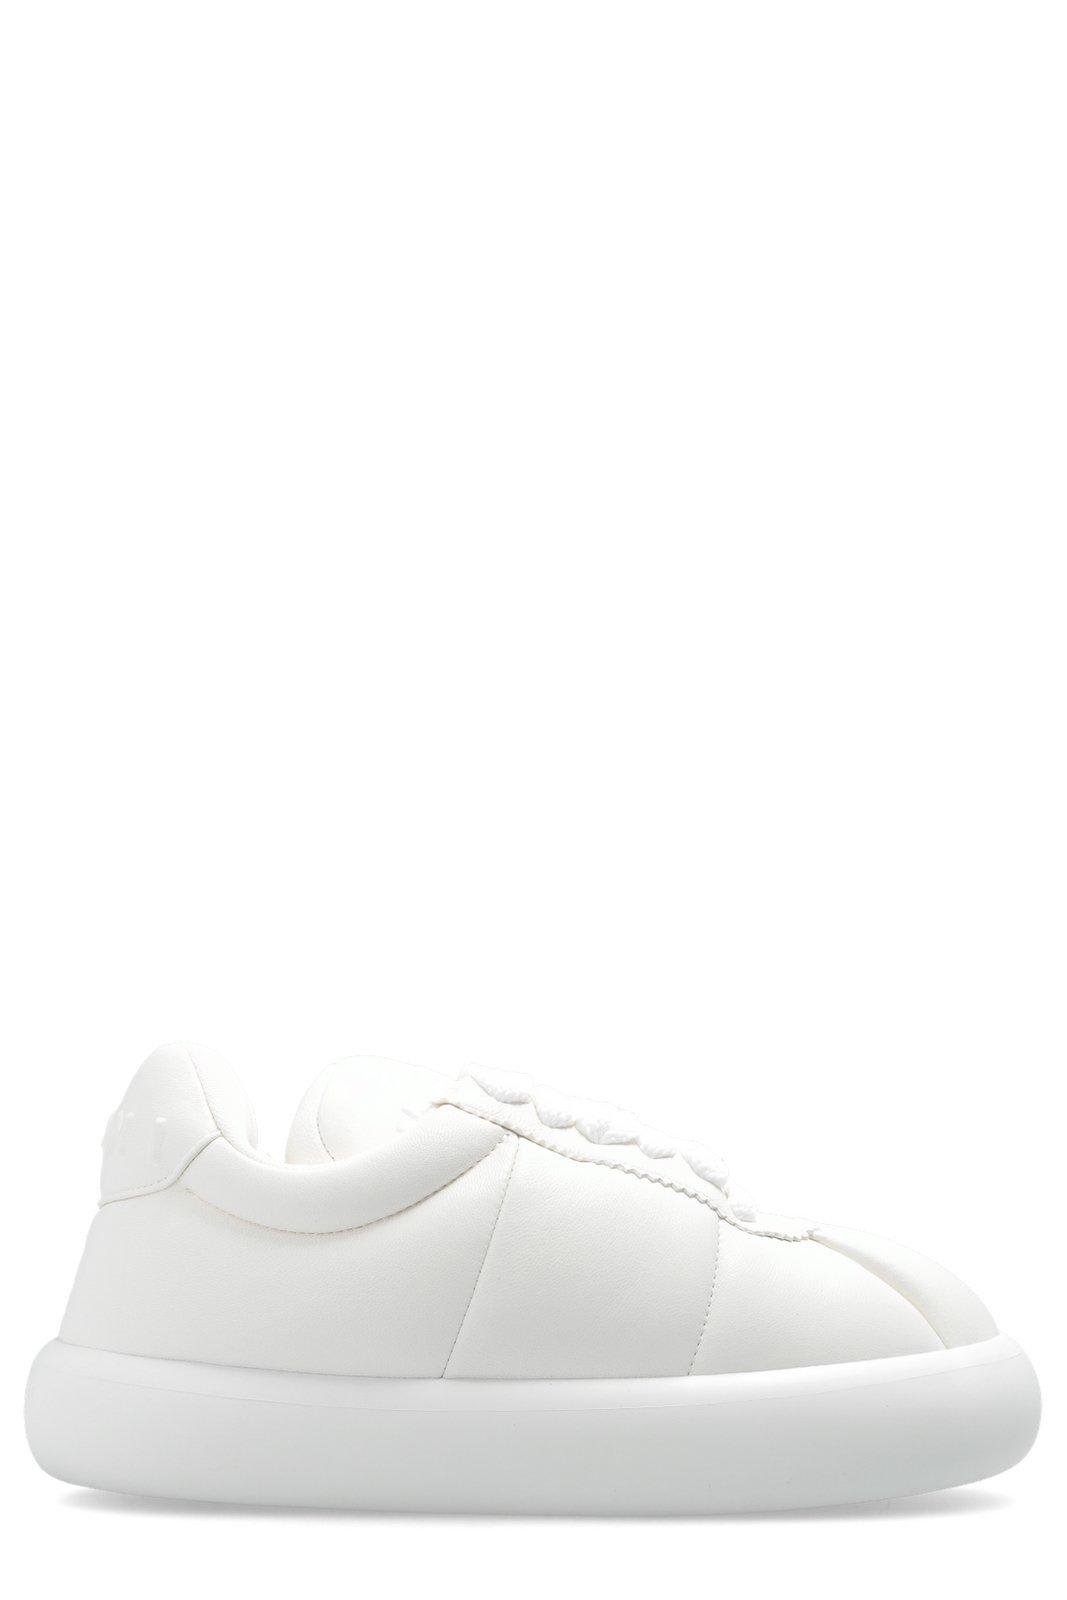 MARNI BIGFOOT 2.0 PADDED LACE-UP SNEAKERS